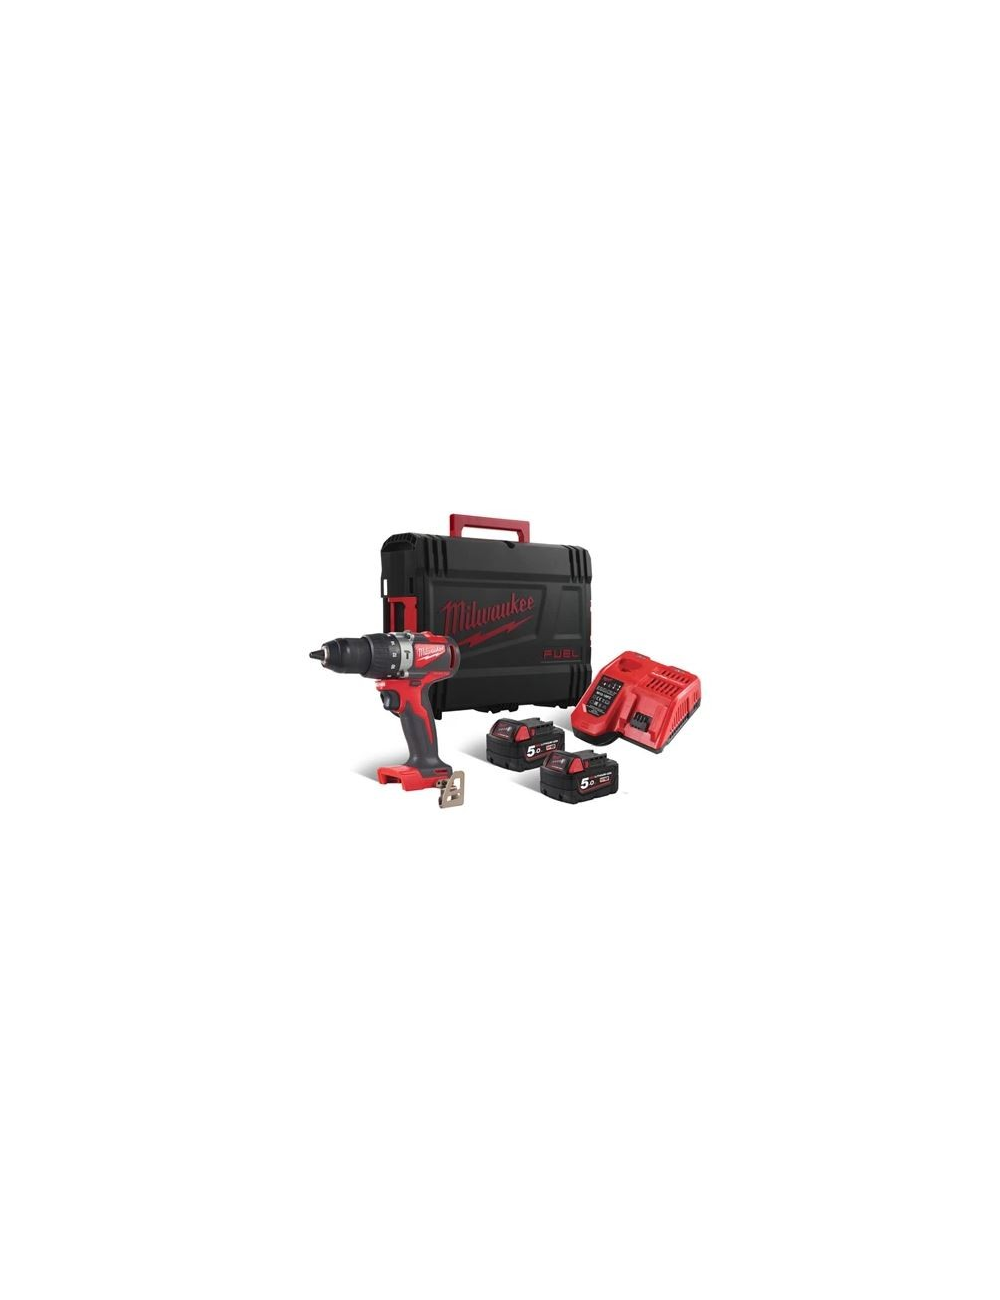 Perceuse MILWAUKEE à percussion 18V, 5,0Ah, 85 Nm,Coffret, 2 Bat. Red+ Chargeur